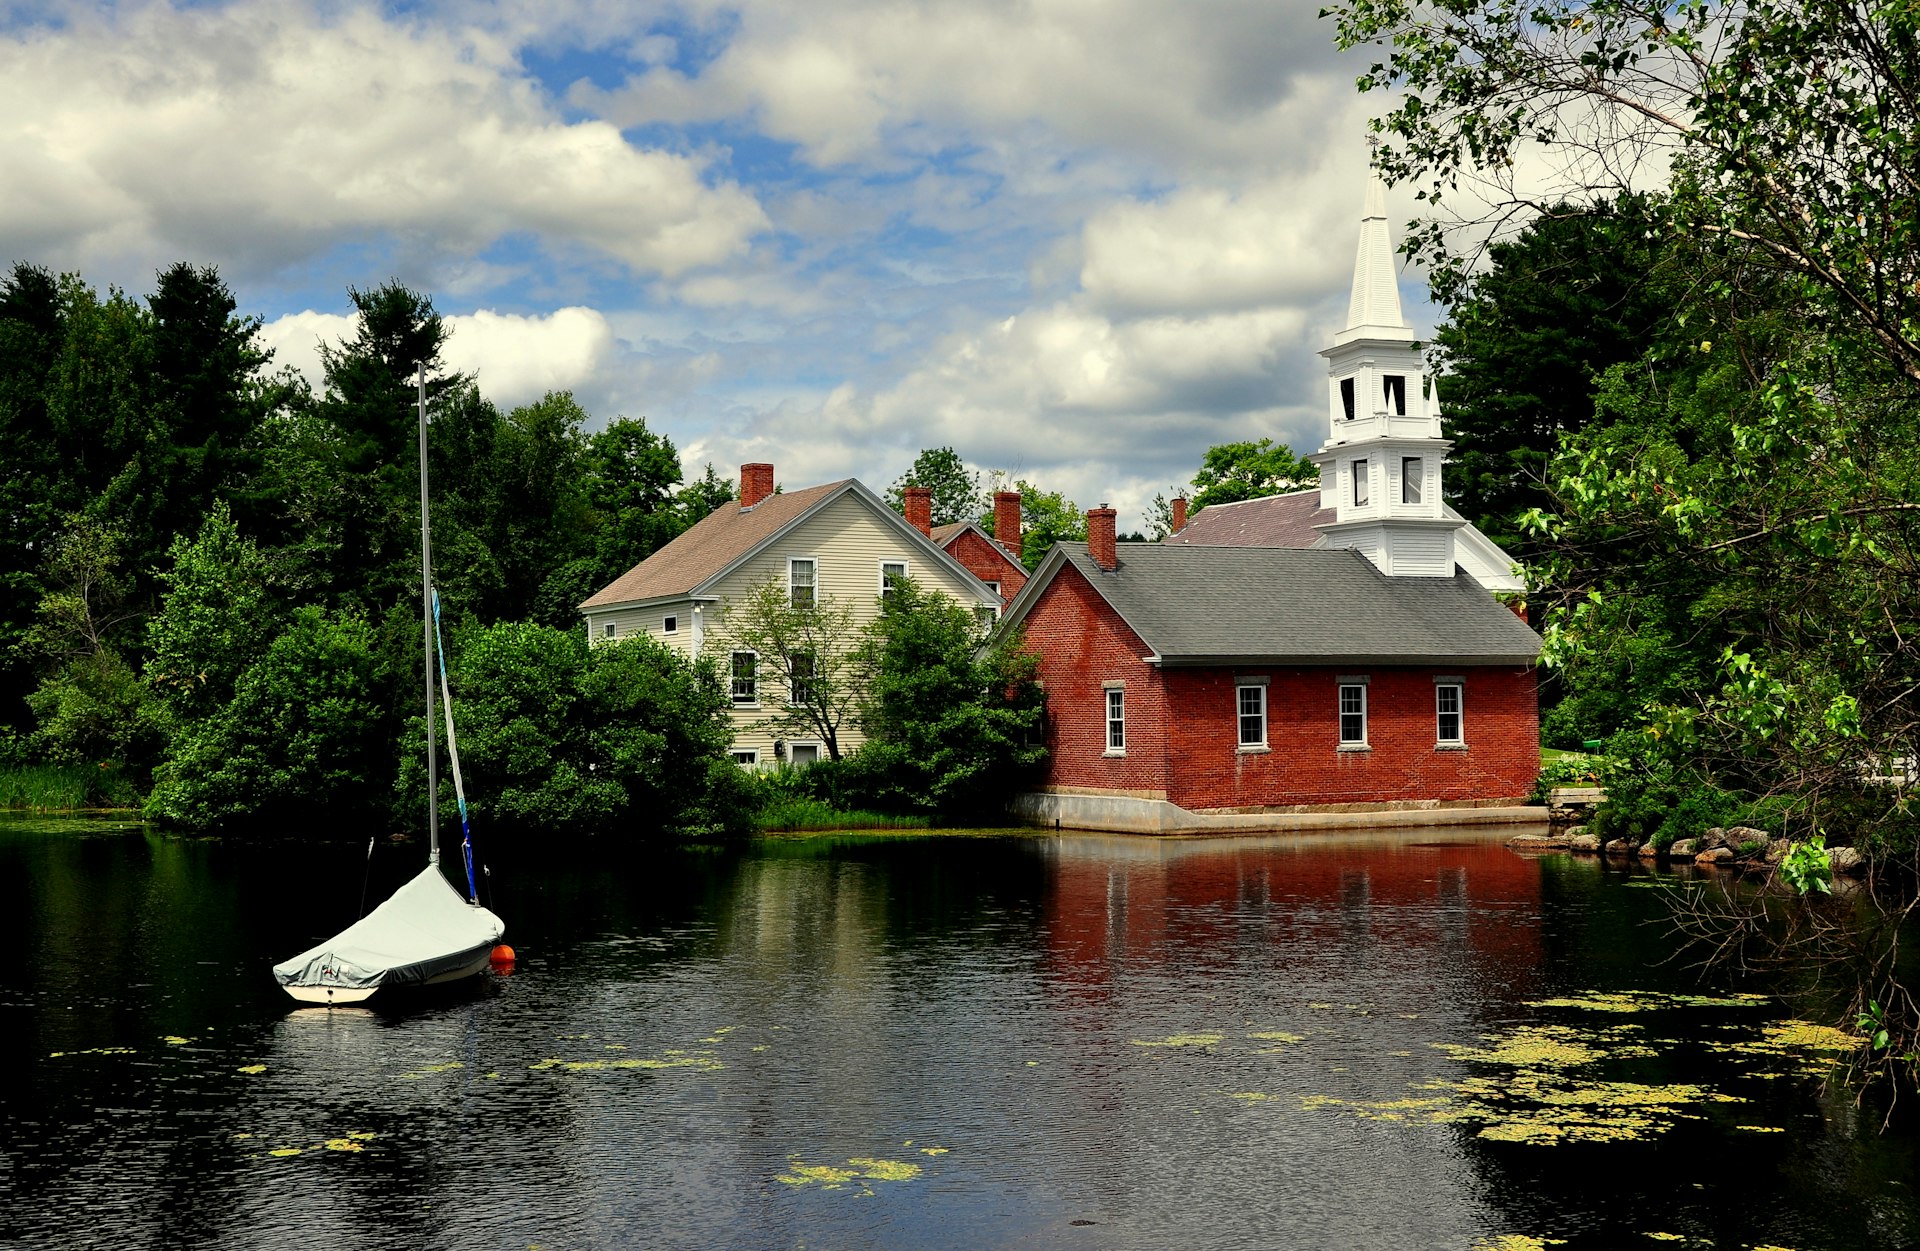 A library and church in Harrisville, New Hampshire, USA